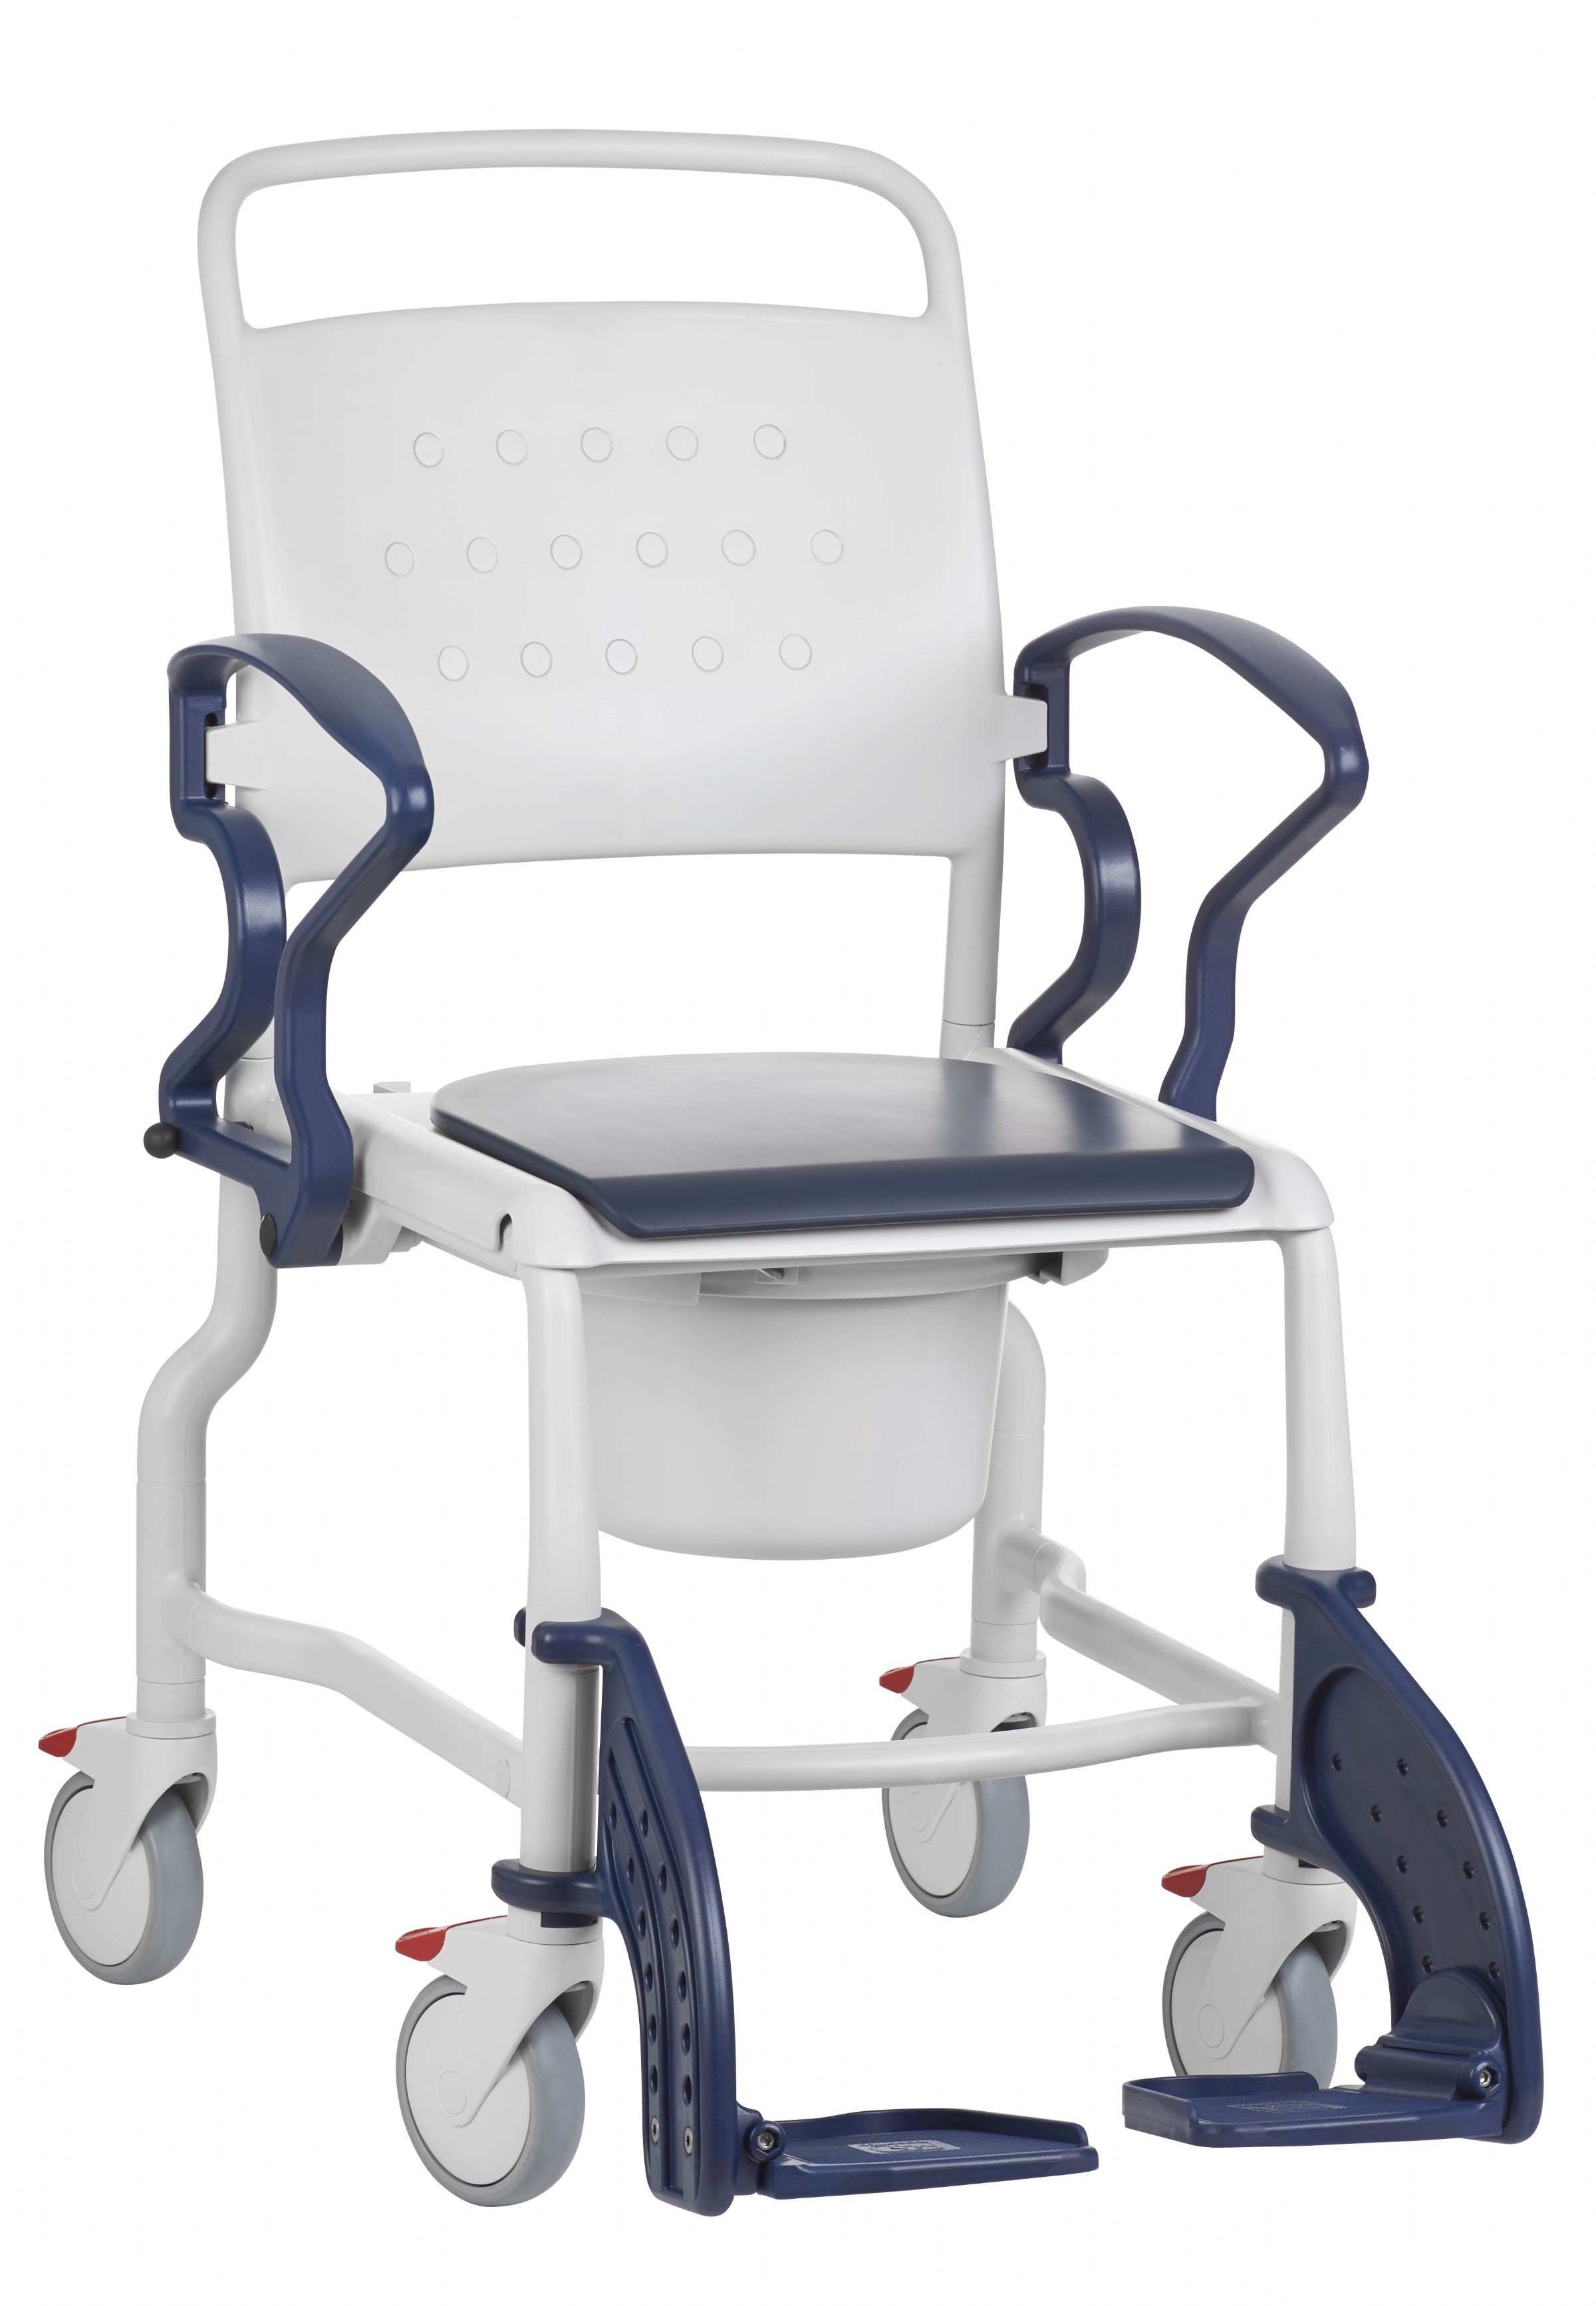 Shower Commode Chairs Special Needs Bathroom Shower Wheelchair Toilet Chair